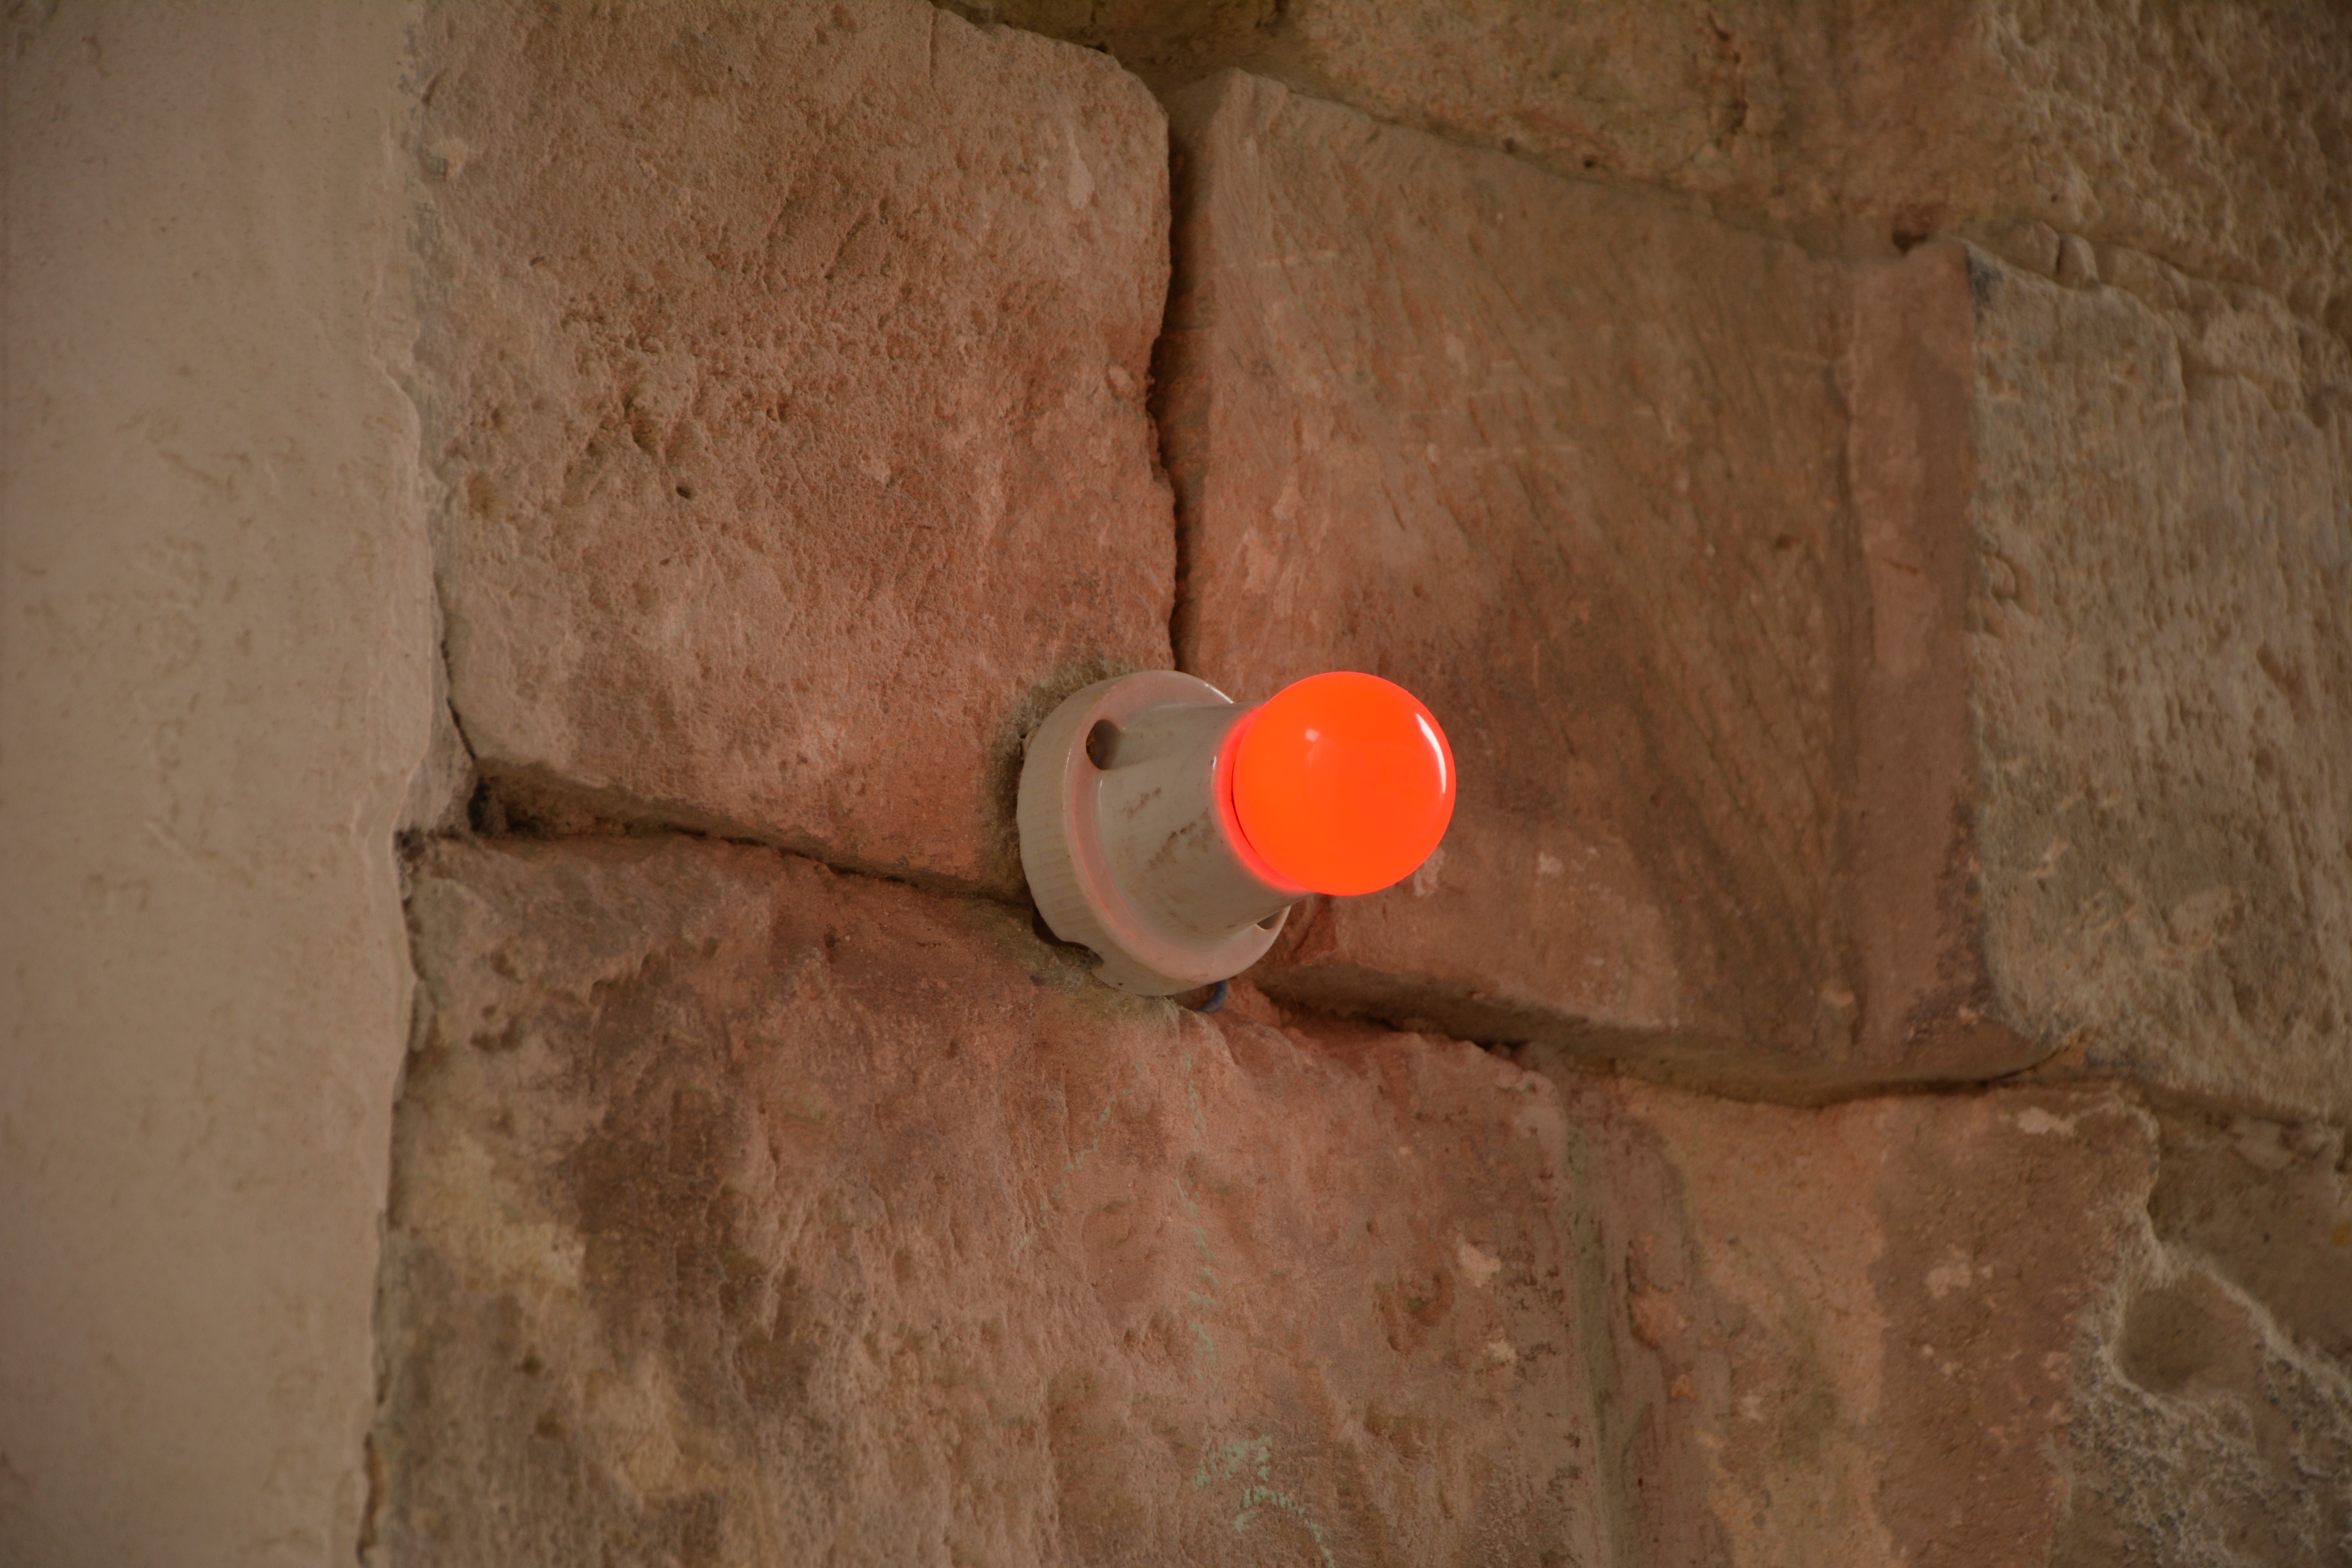 A red light bulb mounted on a stone wall | Source: Shutterstock